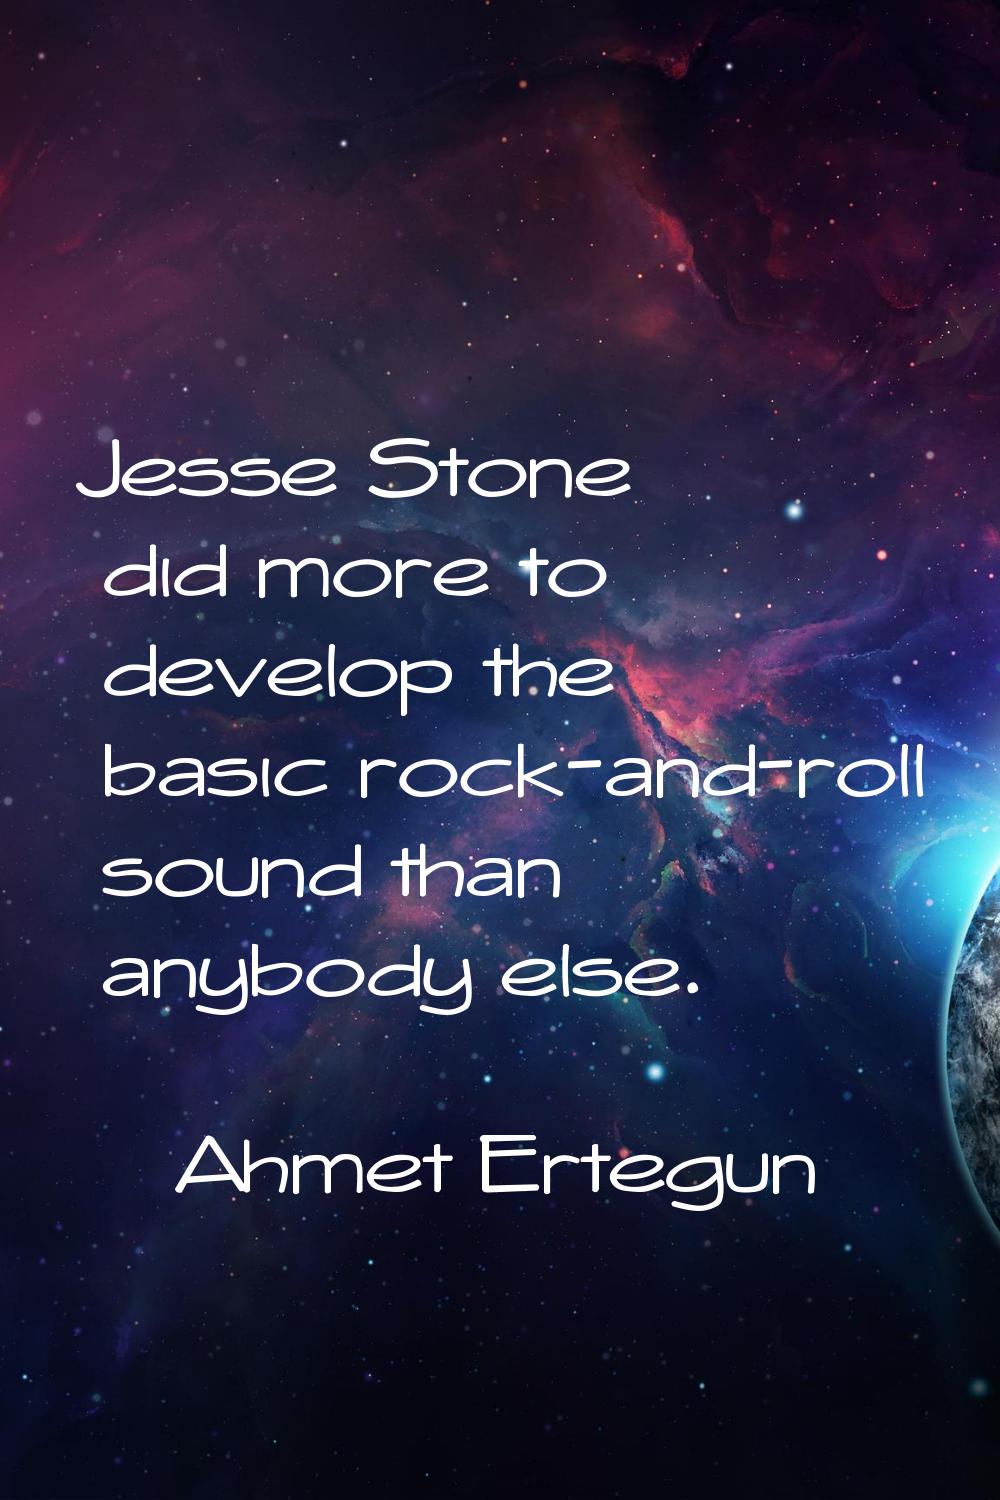 Jesse Stone did more to develop the basic rock-and-roll sound than anybody else.